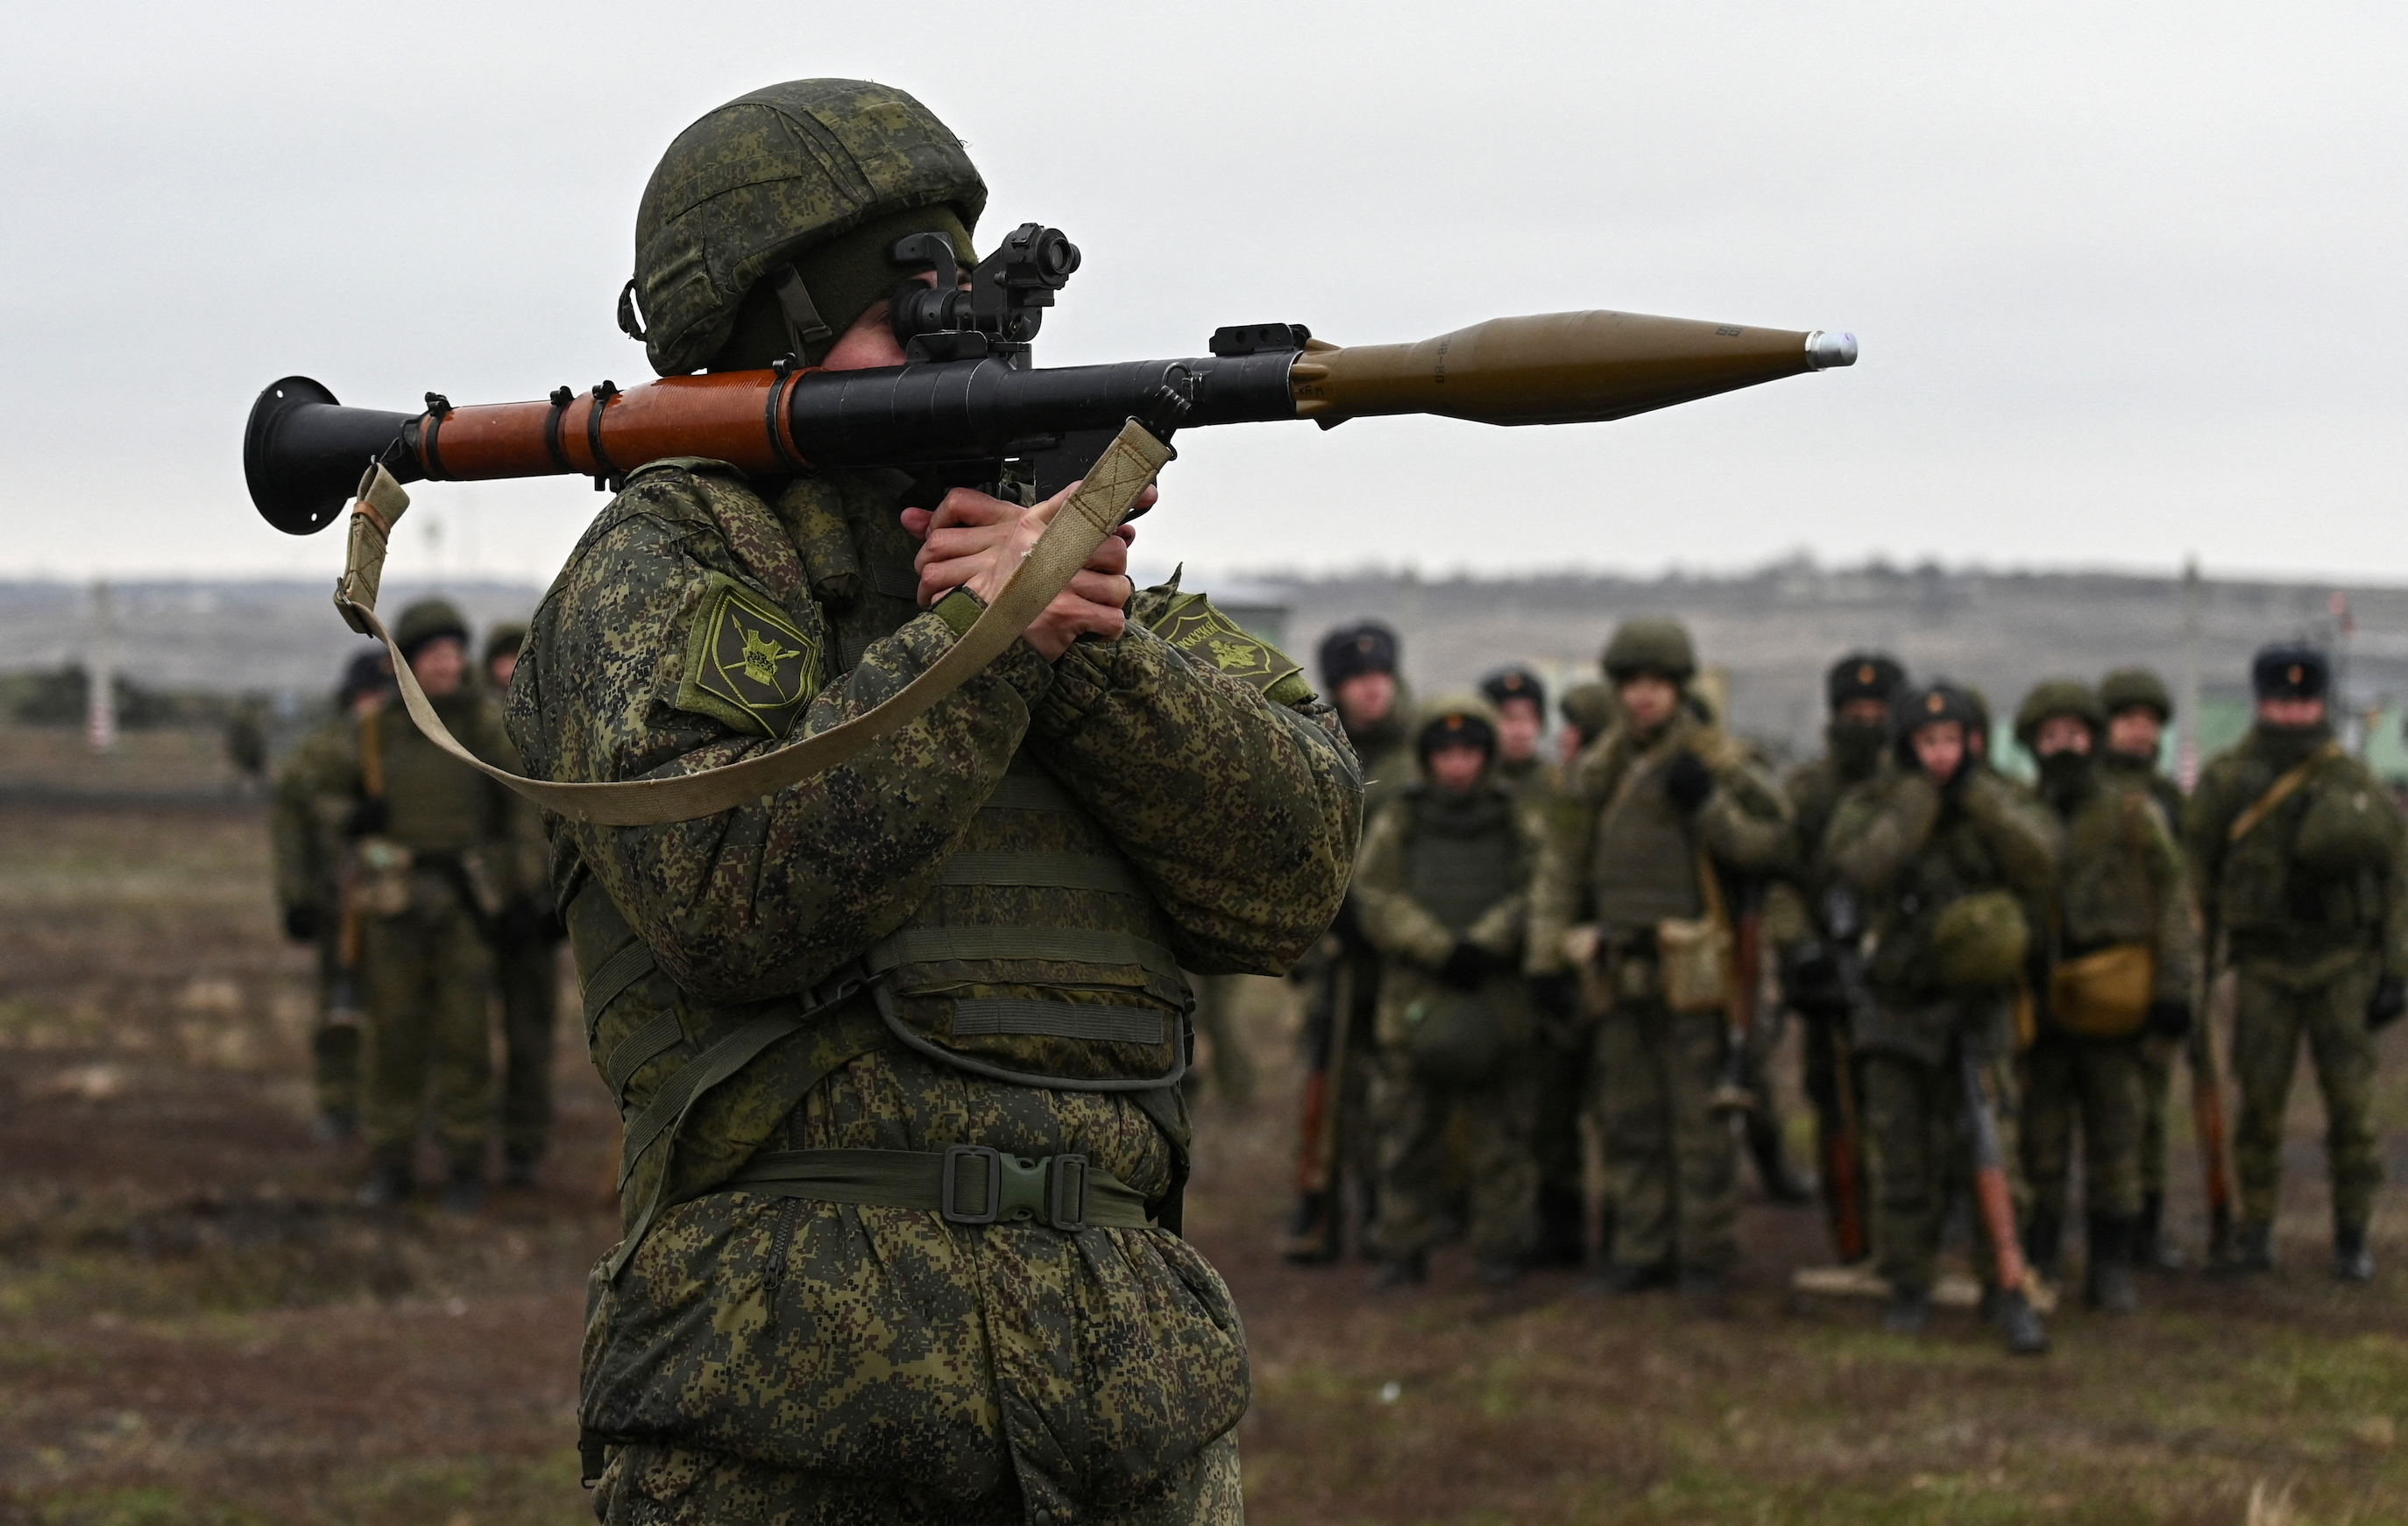 Russian state news outlets recant reports of troops “regrouping” in southern Ukraine